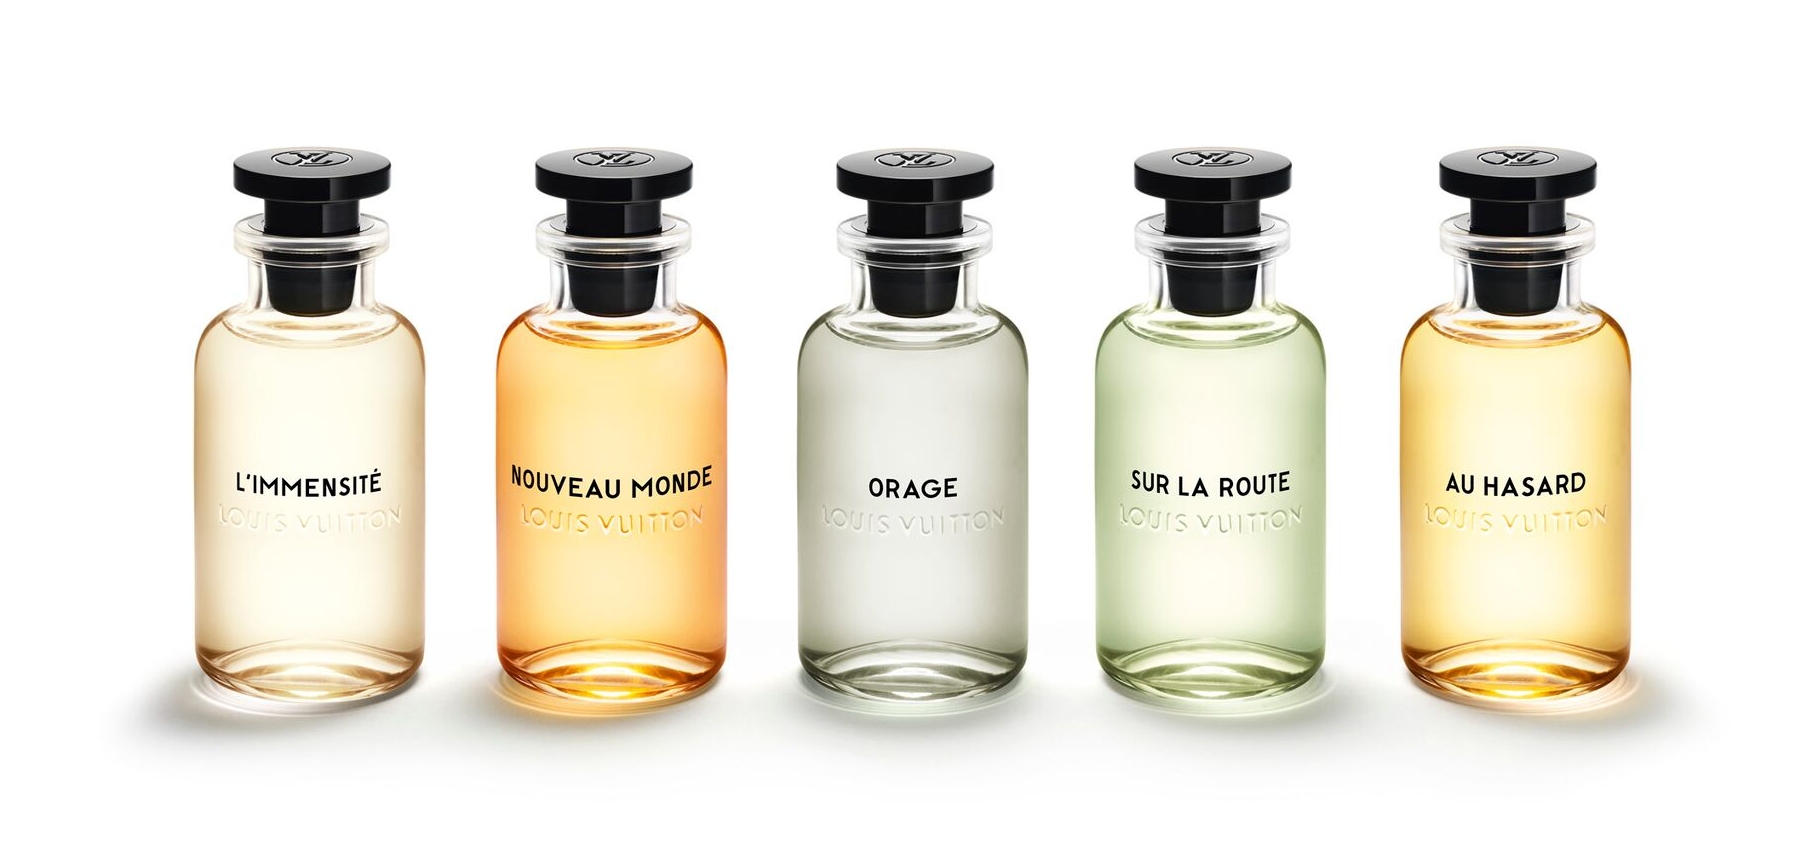 Nomade Blend (Inspired by Louis Vuitton) - The Perfumers